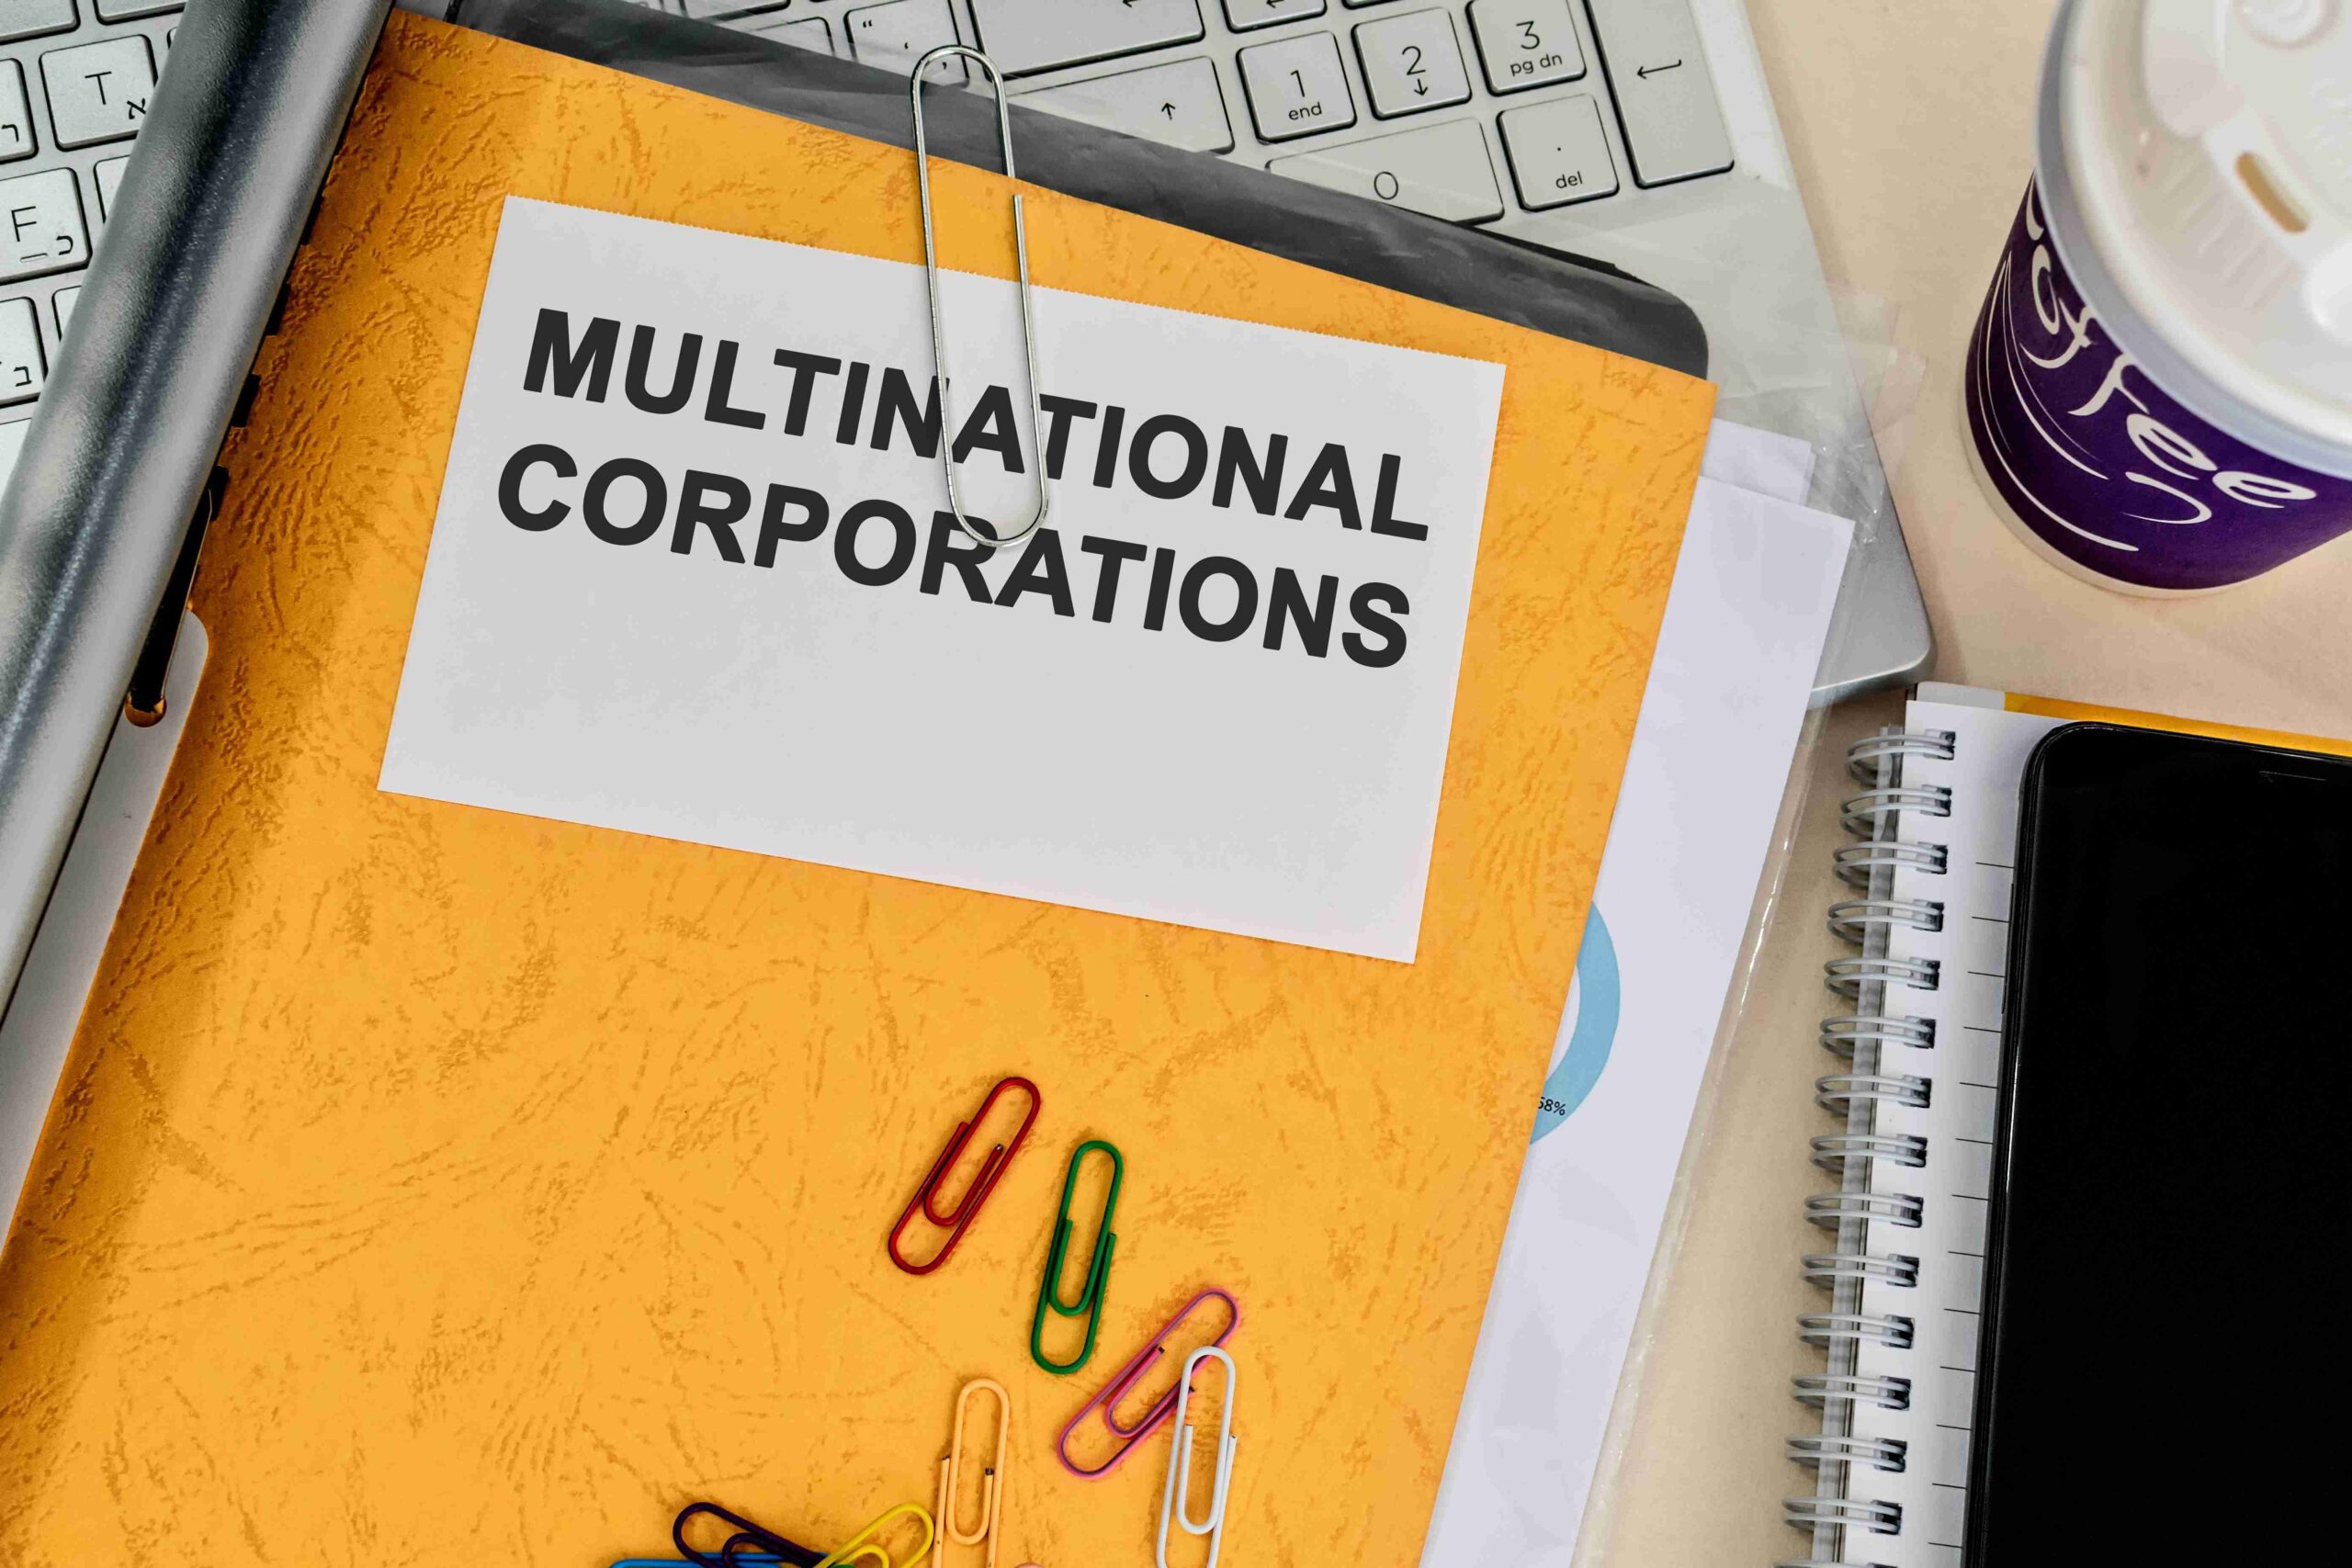 Multinational Corporations Impact Global Economies Positively – A Comprehensive Analysis